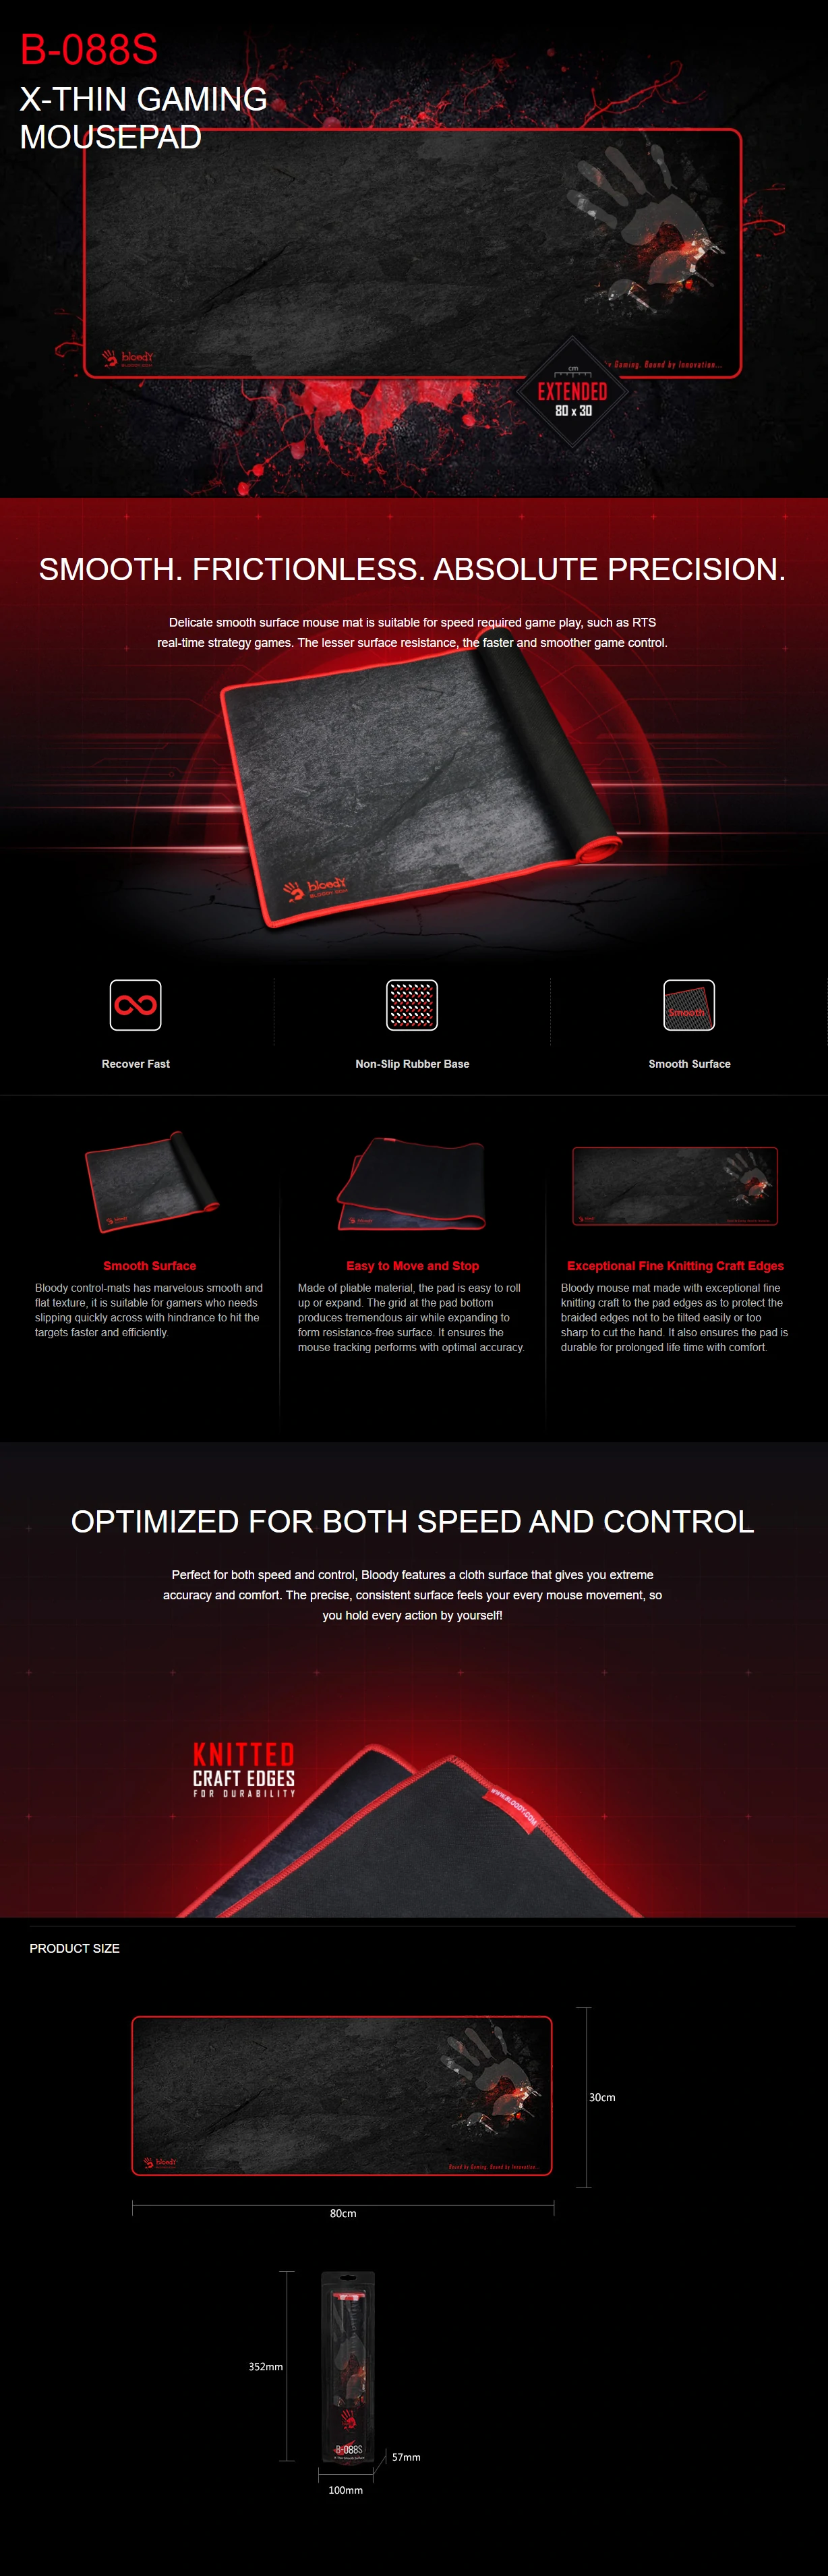 Overview - Bloody - B-088S X-Thin Gaming Mousepad